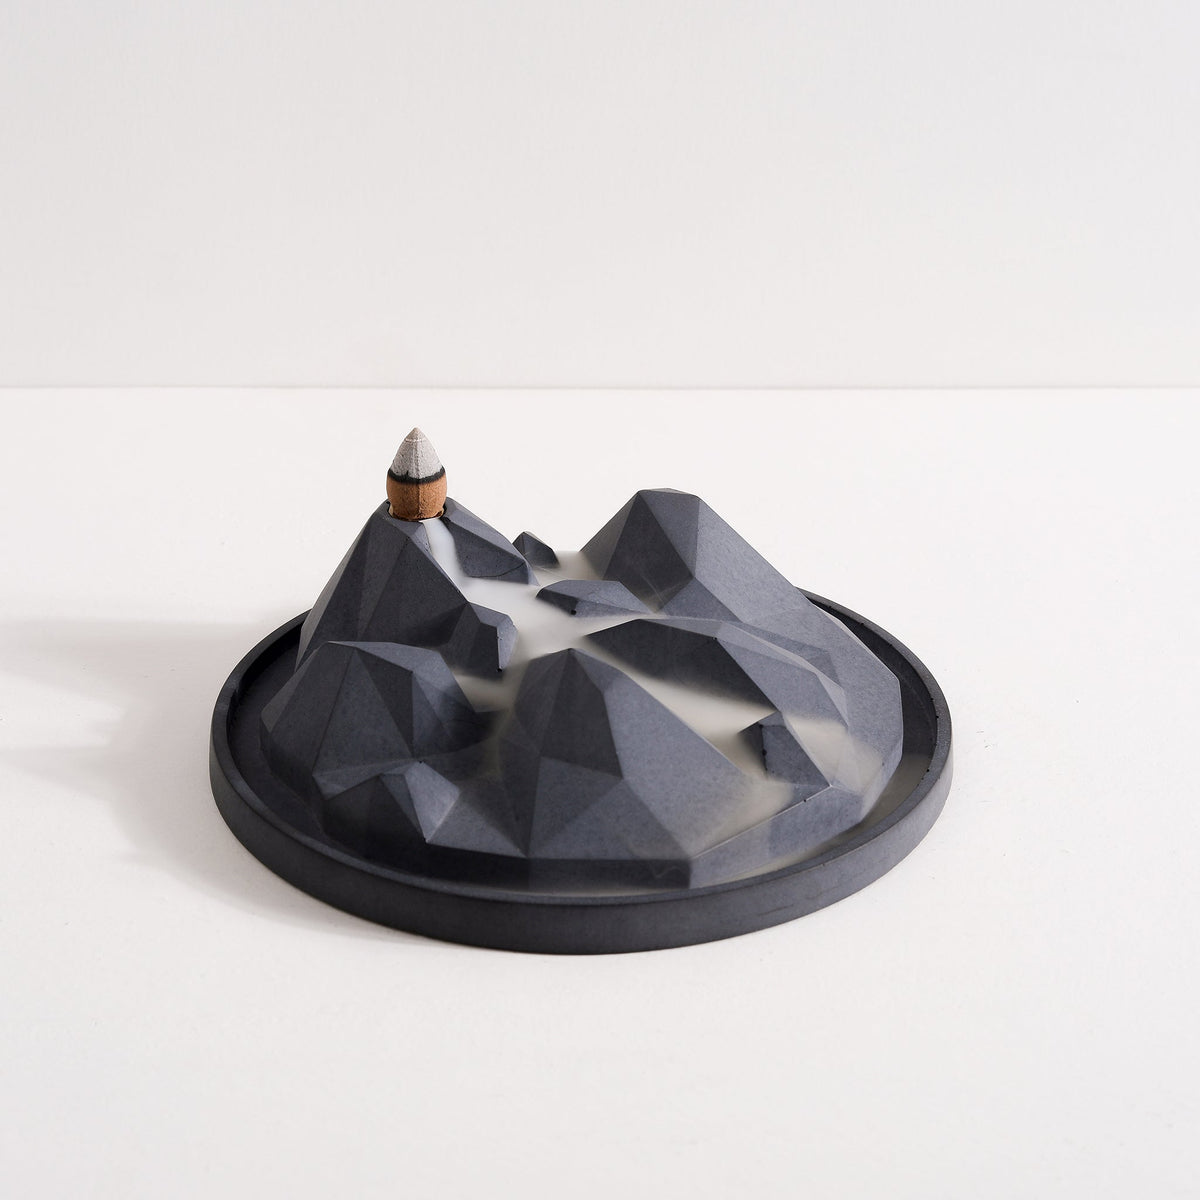 Valley of Fog Incense Waterfall by Kin Objects with smoke flowing down